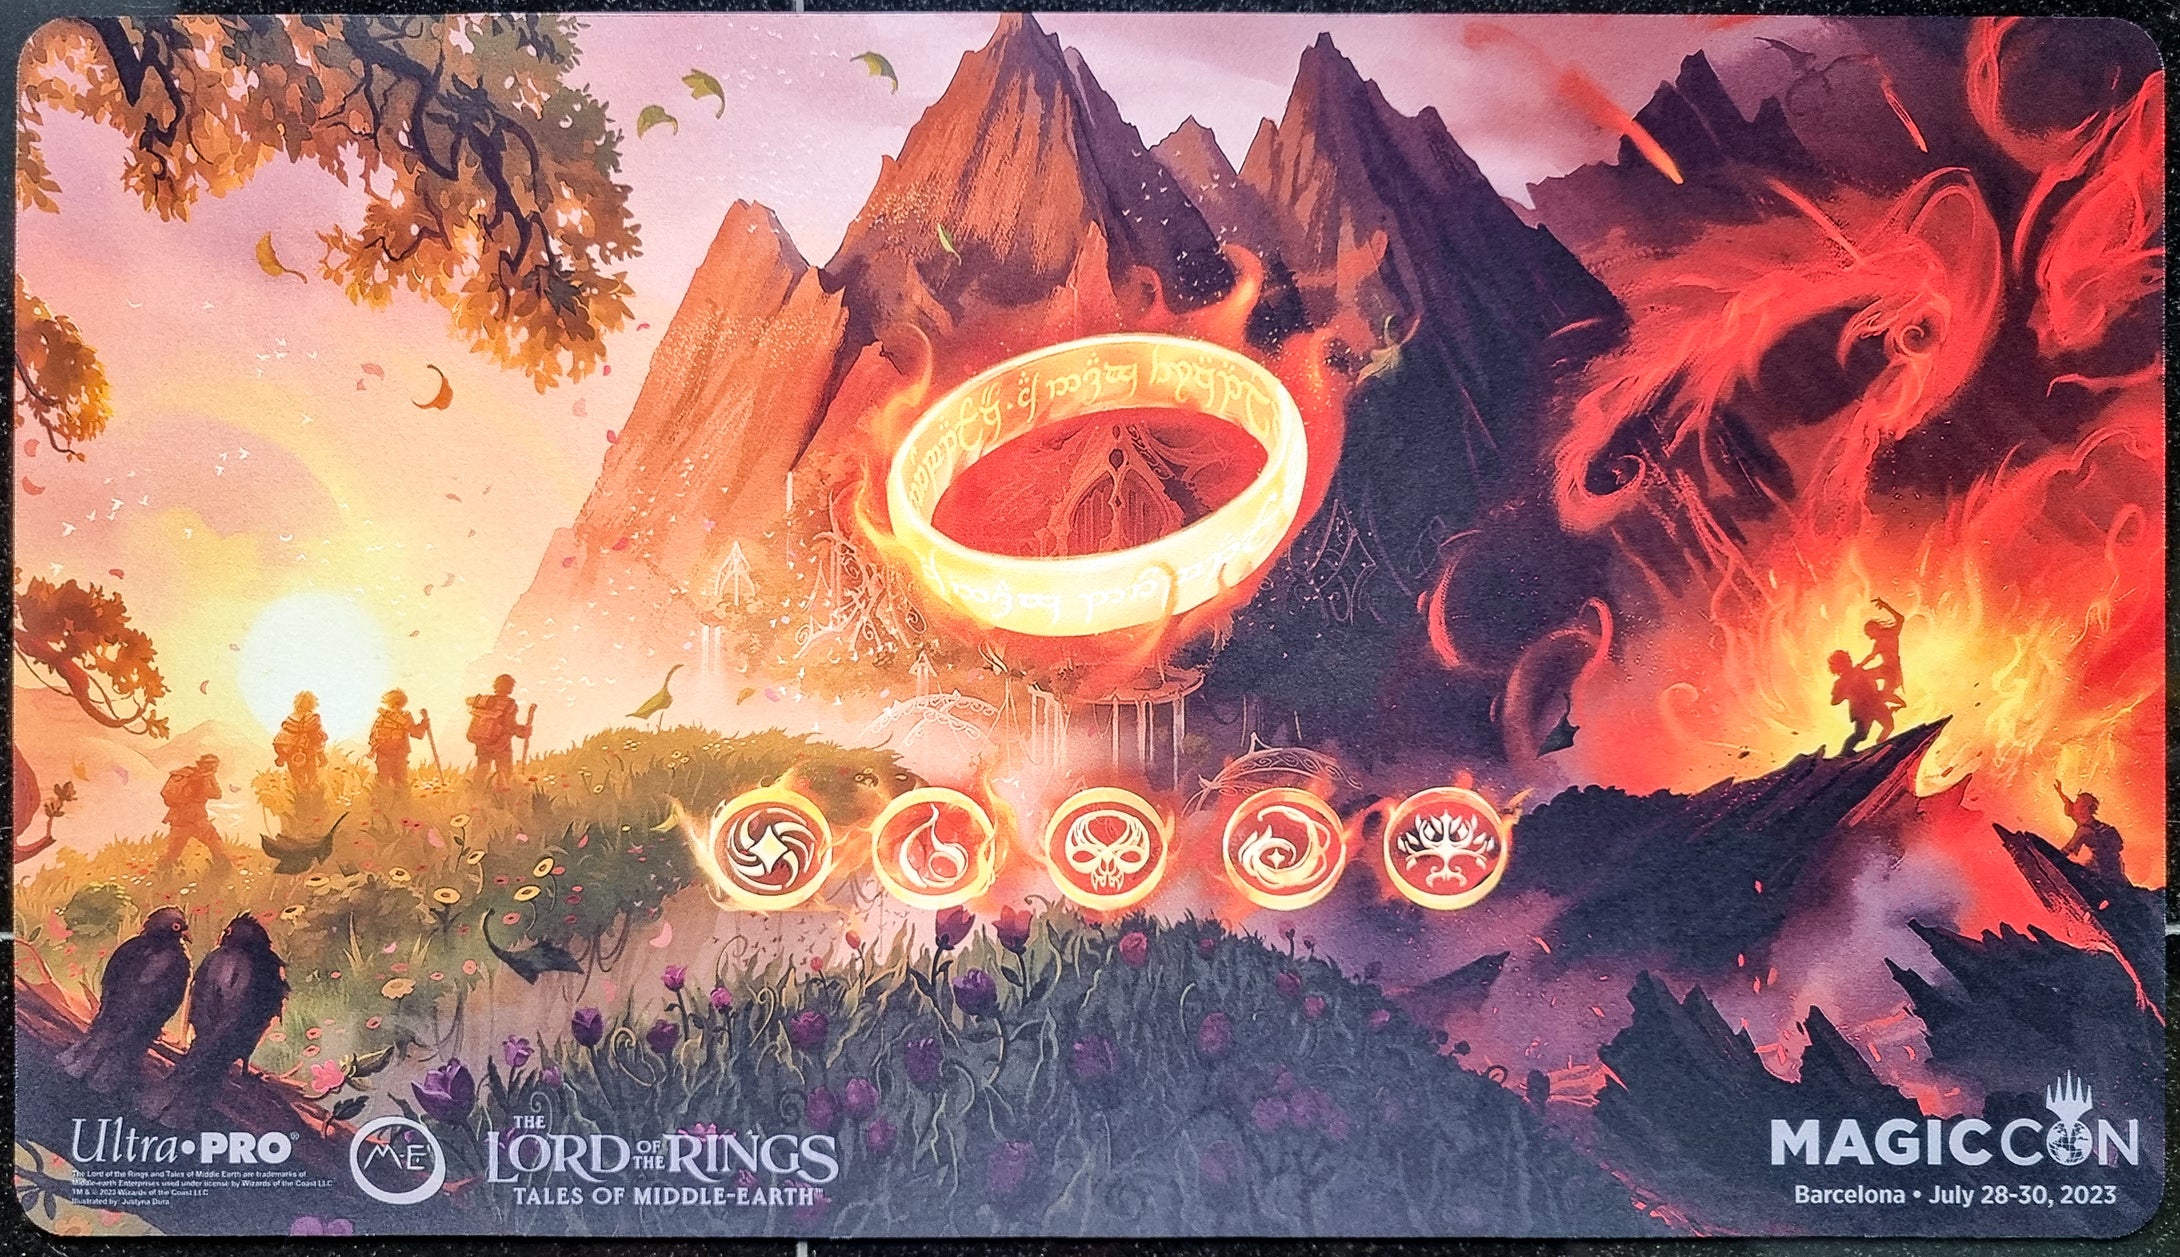 Key Art - The Lord of the Rings - Tales of Middle Earth - Justyna Dura - Magic Con Barcelona 2023 - MTG Playmat